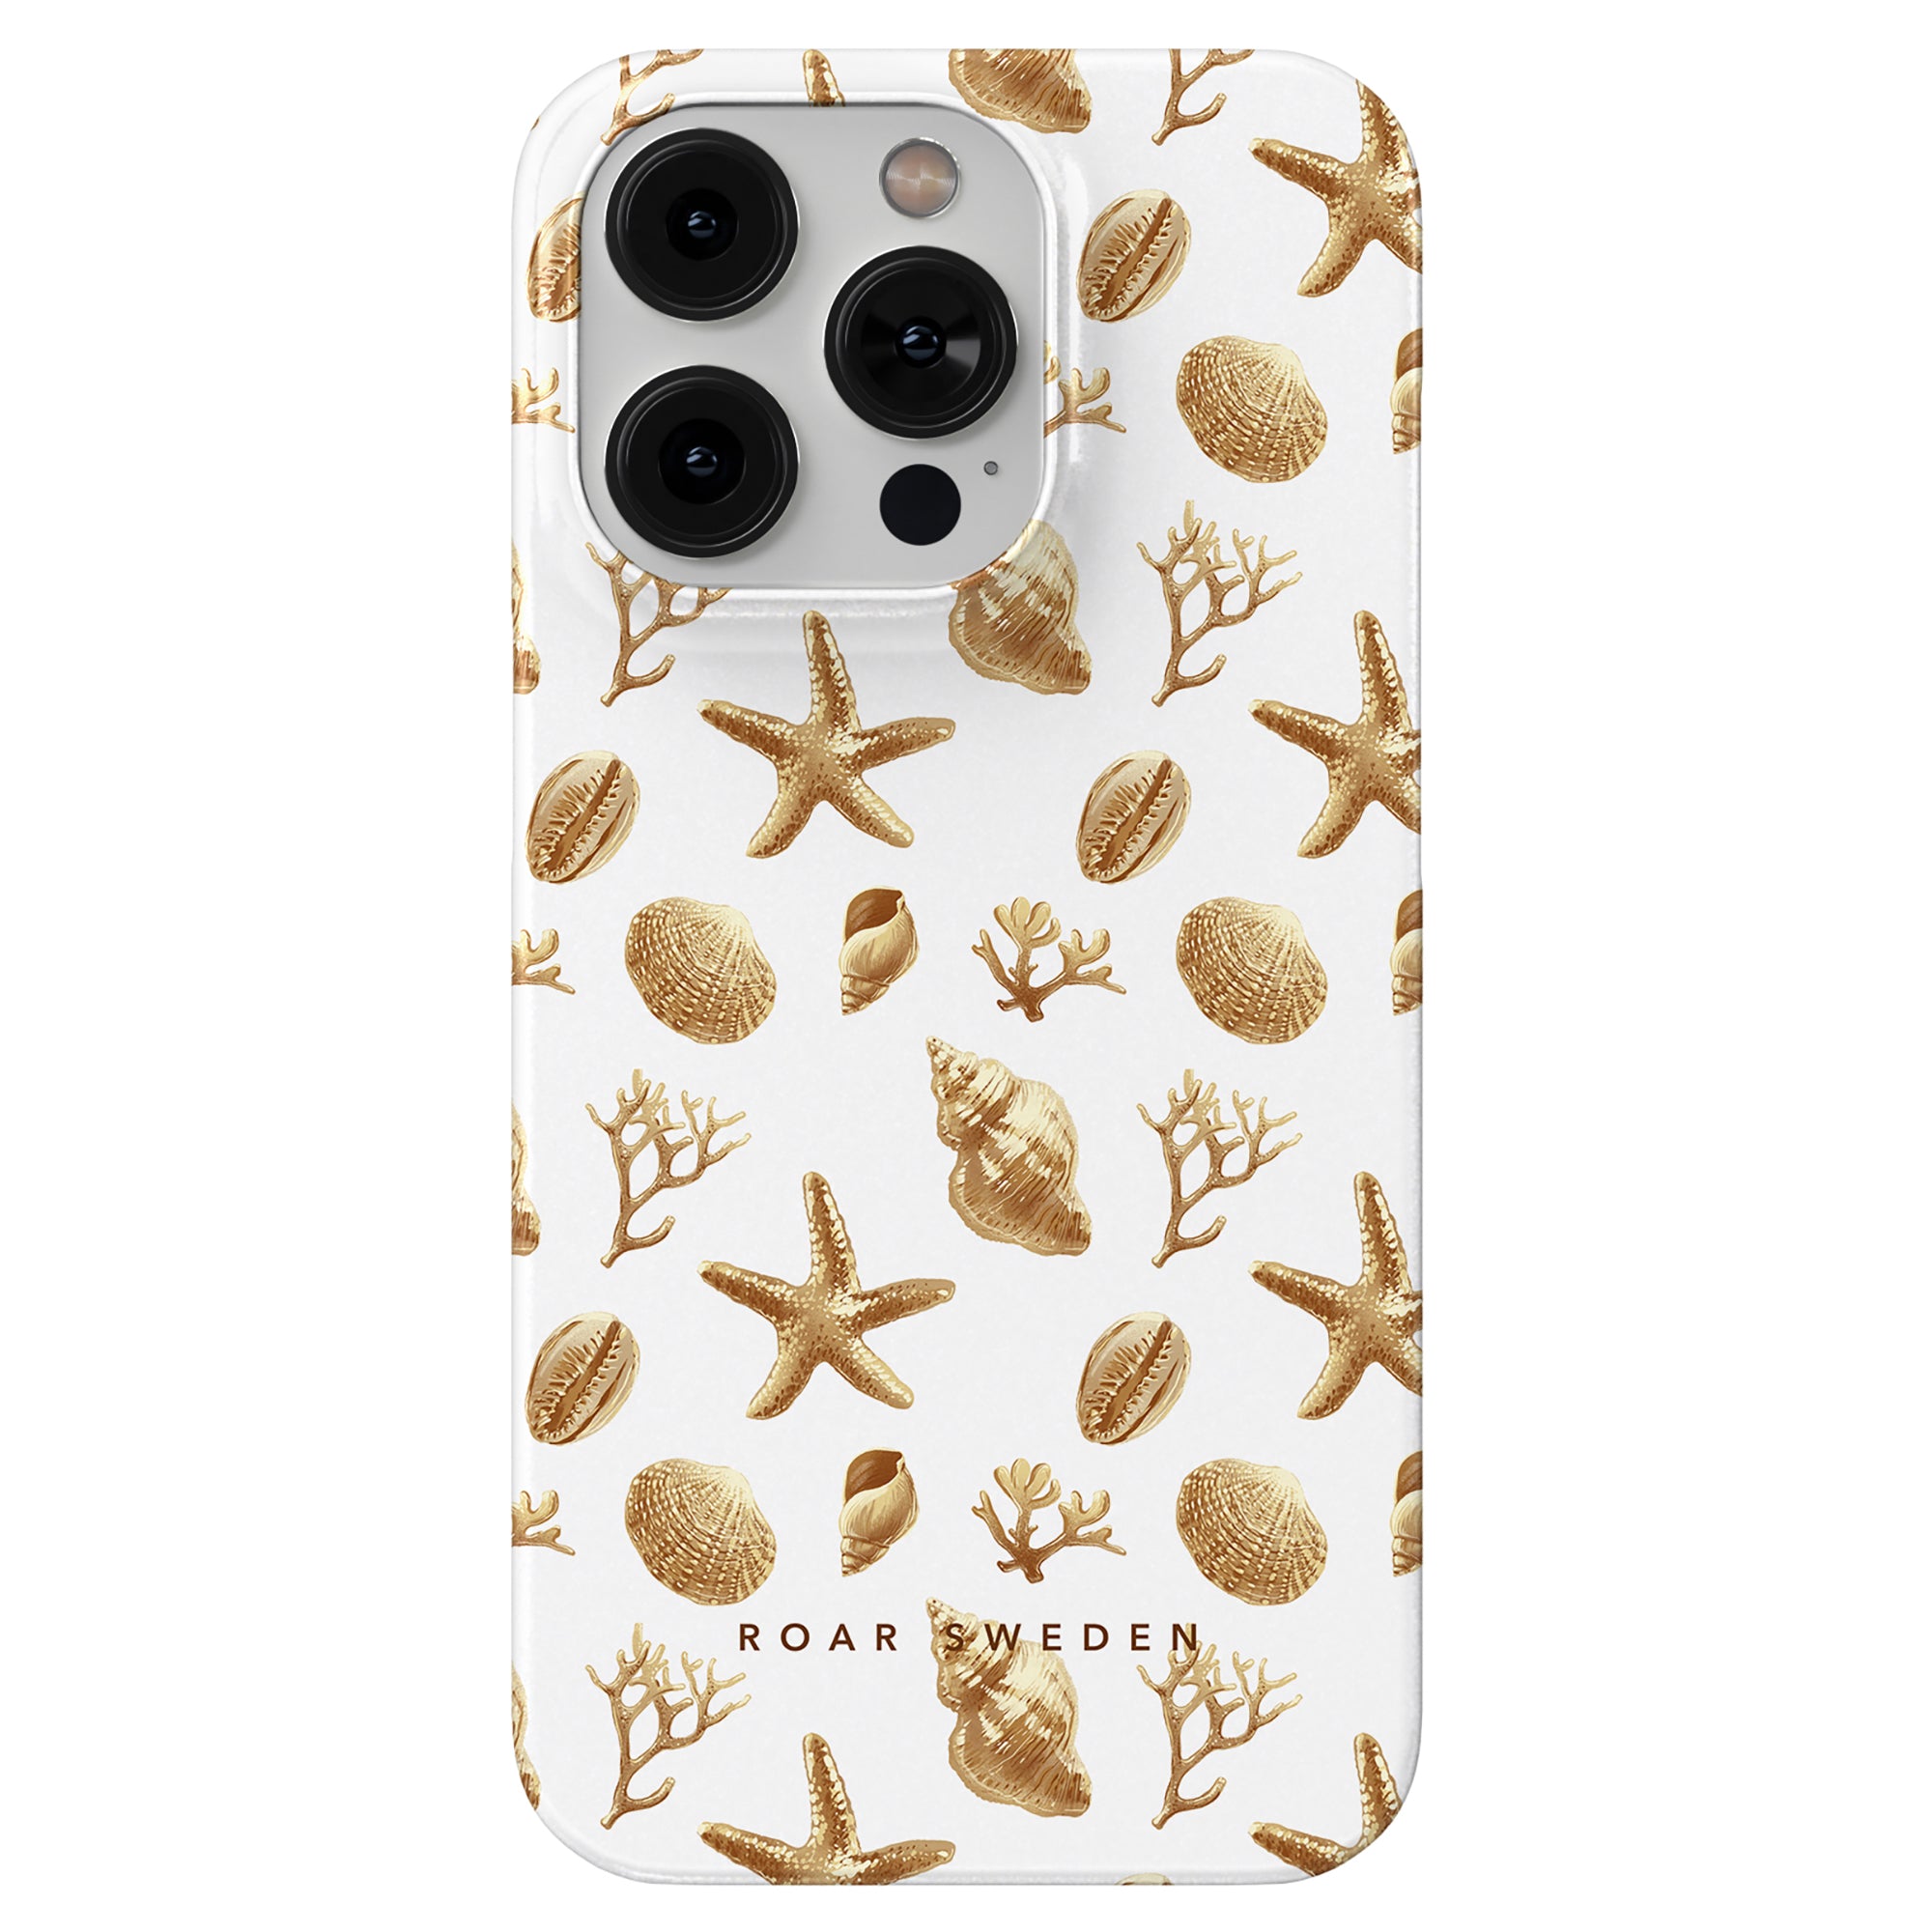 A Golden Shells slim phone case with a marine-themed pattern featuring gold starfish, seashells, and crabs on a white background.